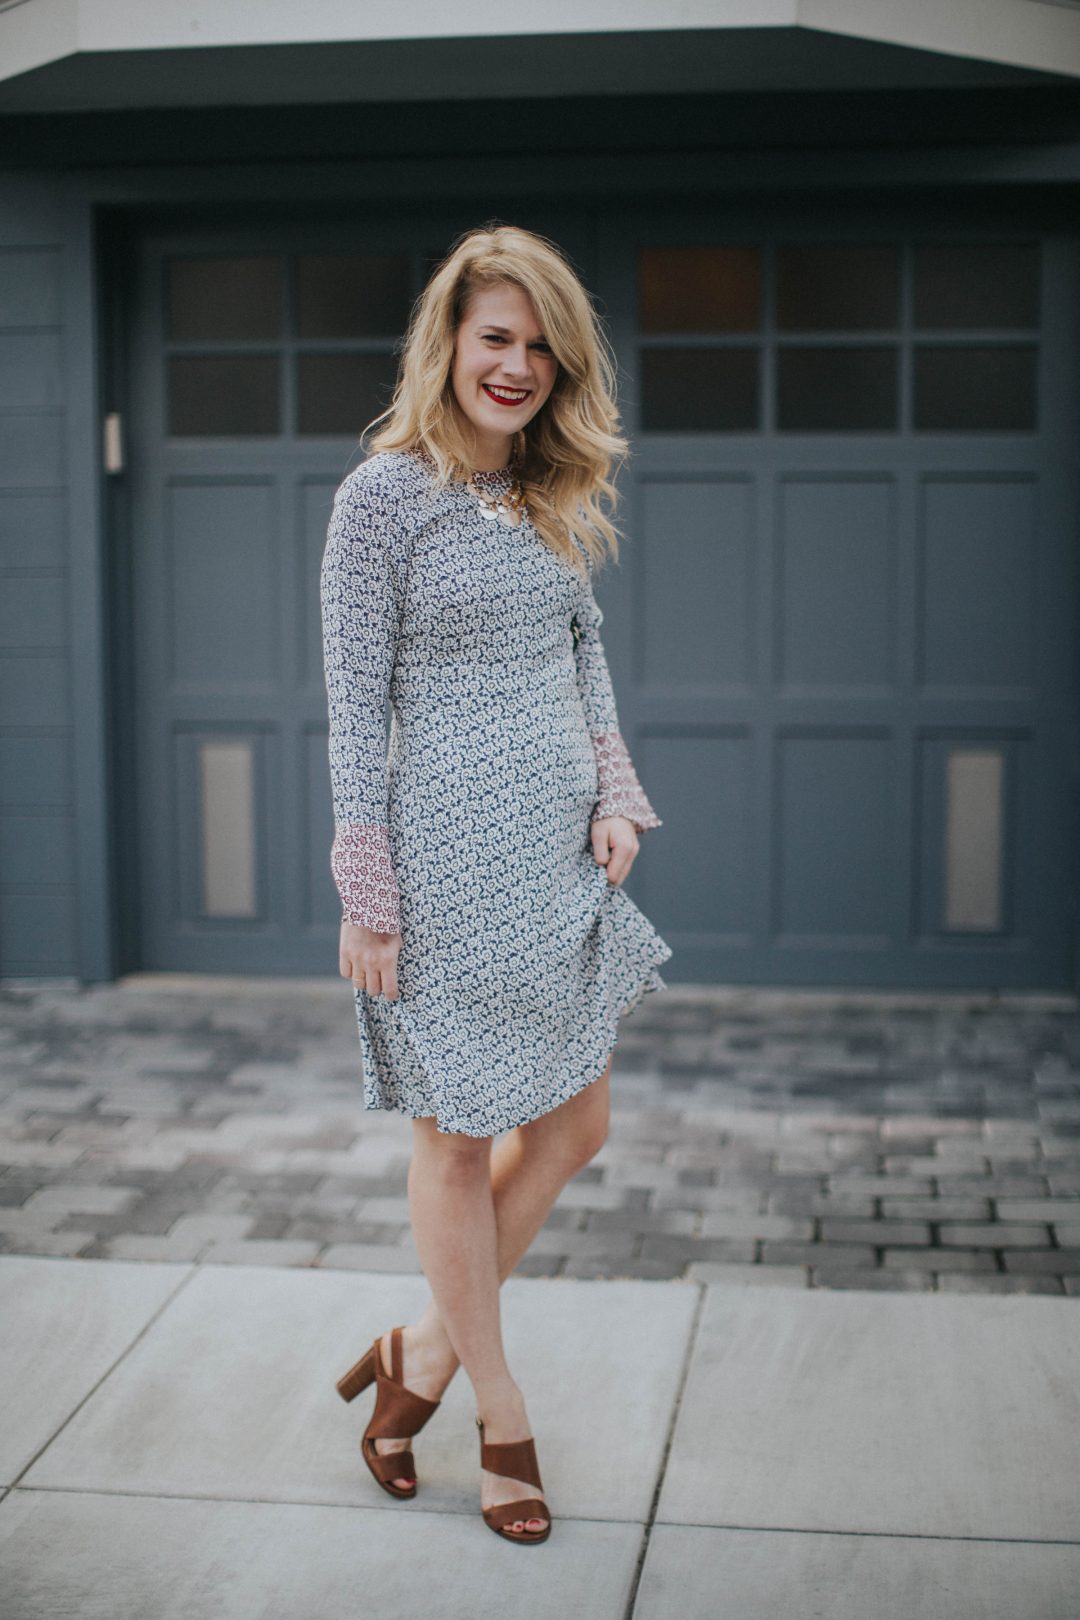 Blogger Cait Weingartner of Pretty & Fun wearing a LOFT floral bell sleeve dress with M. Gemi sandals and a BaubleBar statement necklace.